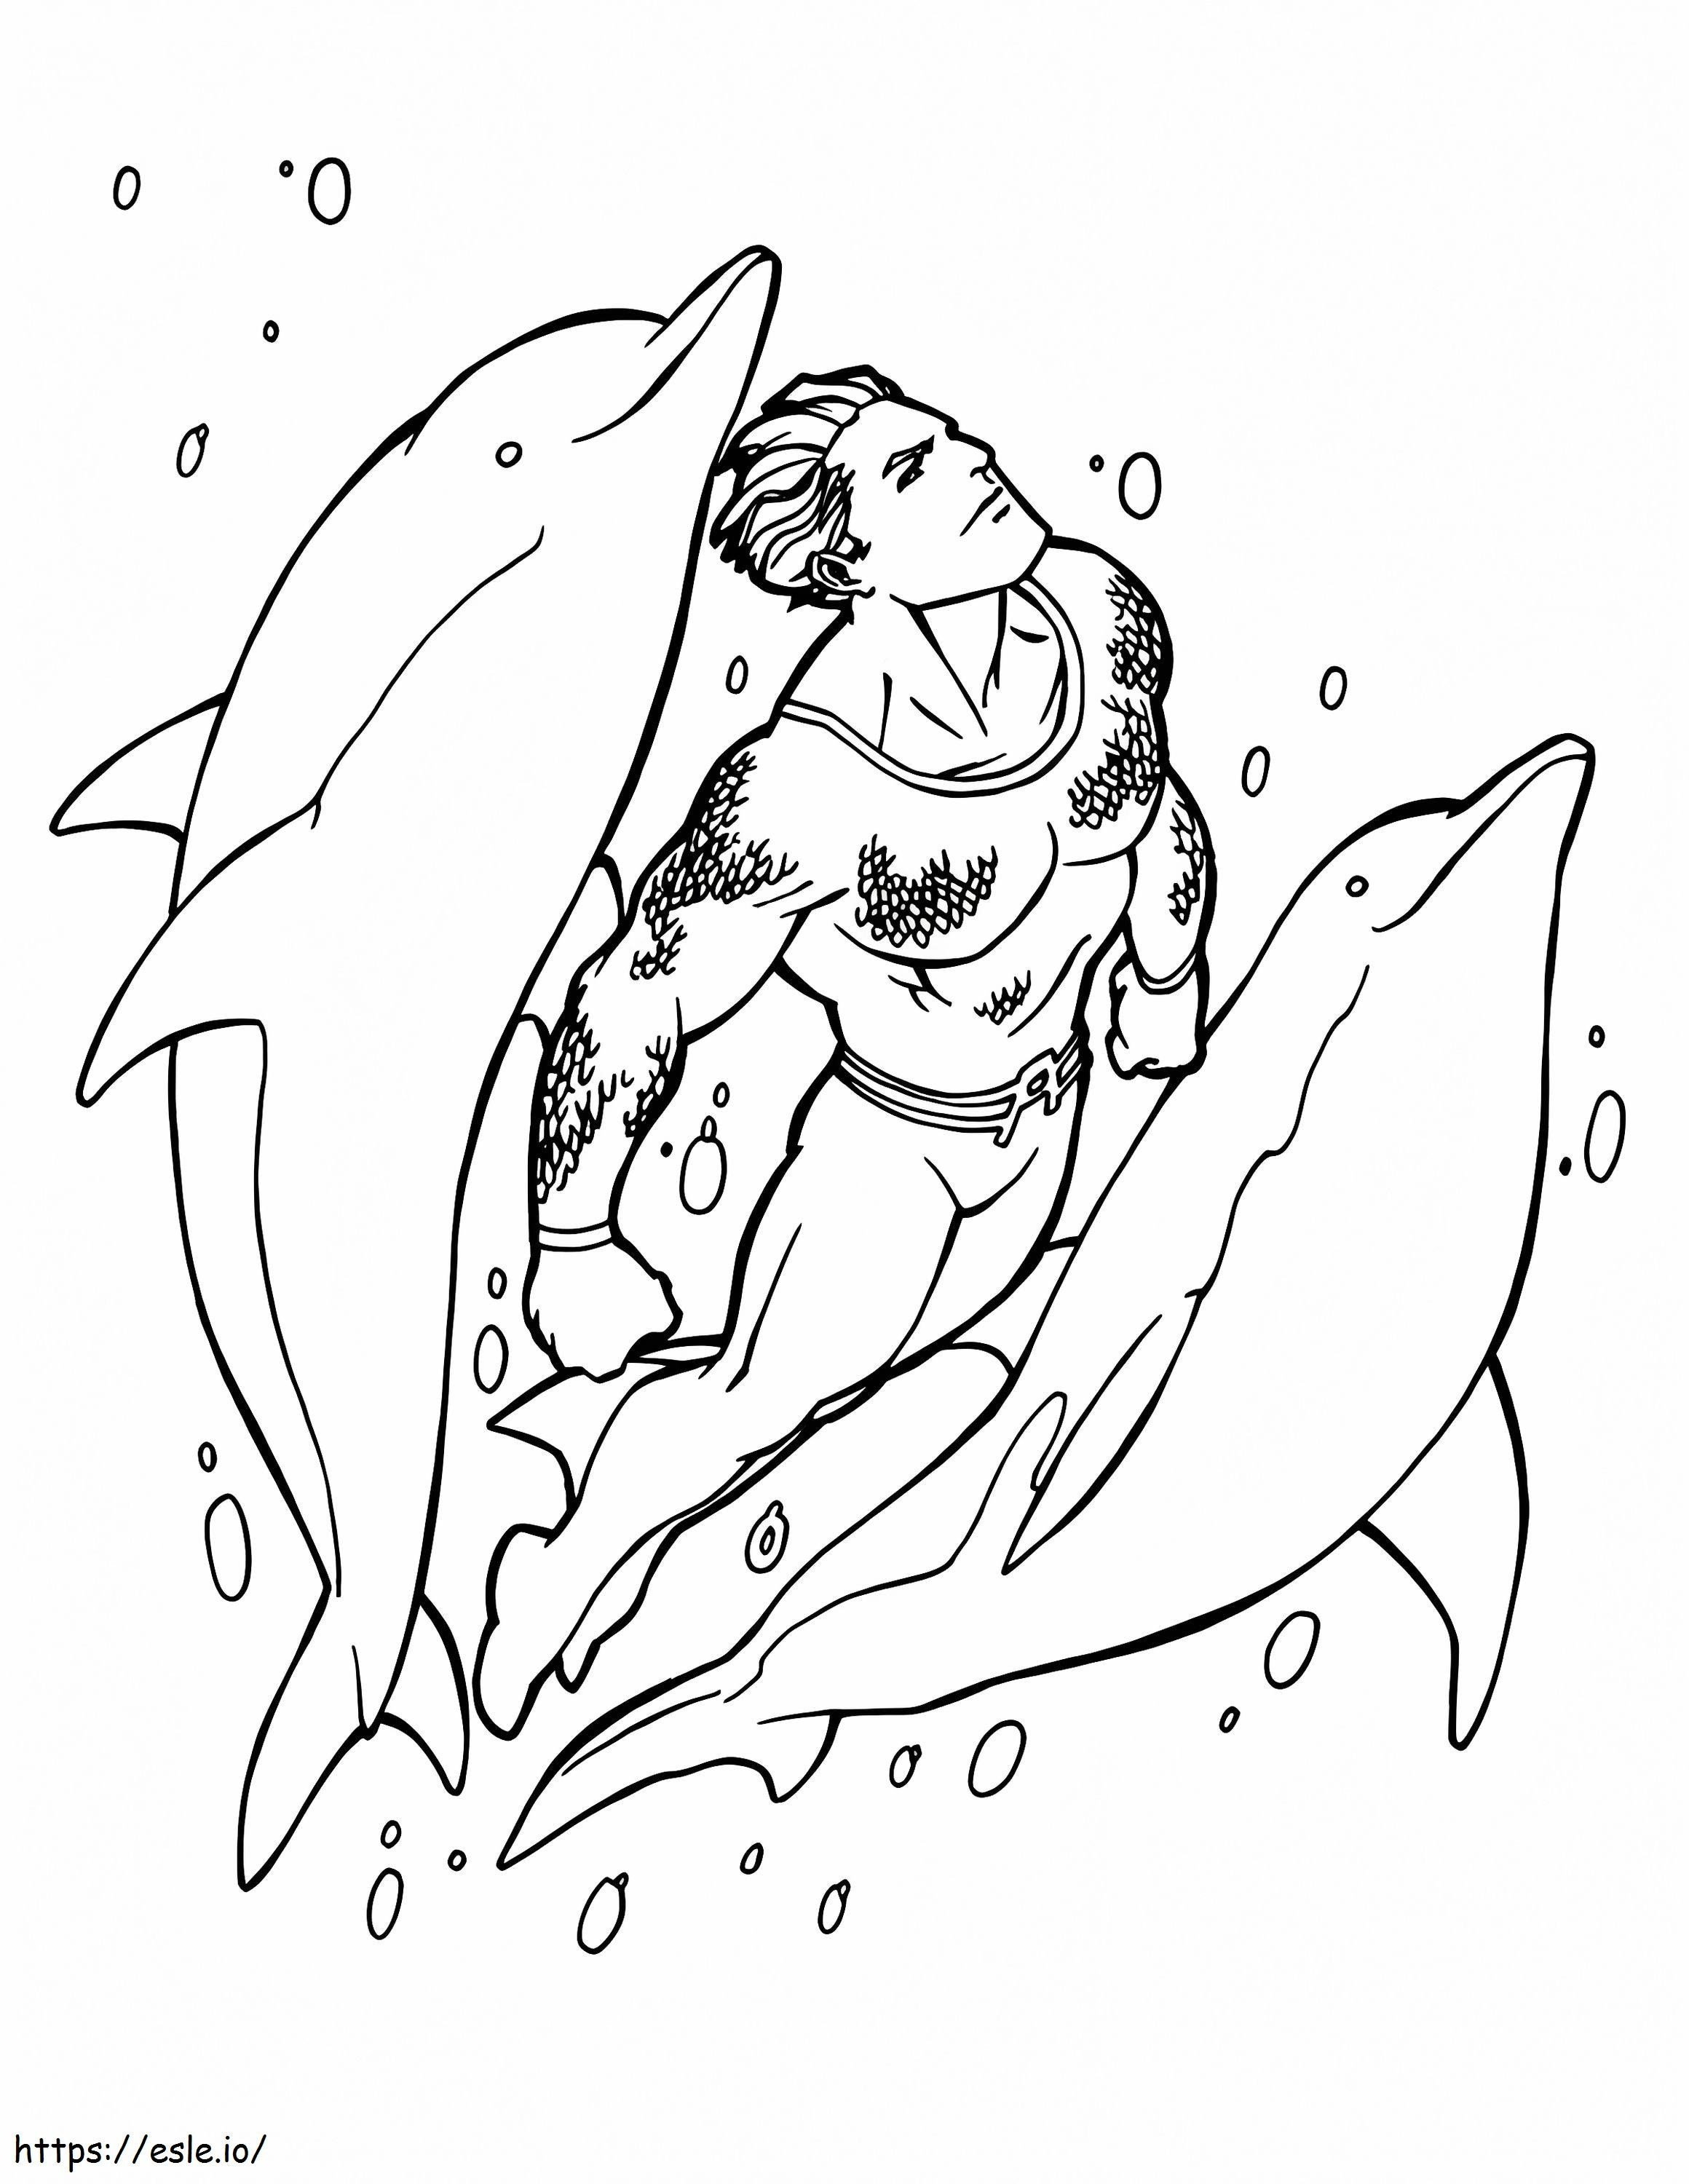 Aquaman Swimming And Two Dolphins coloring page